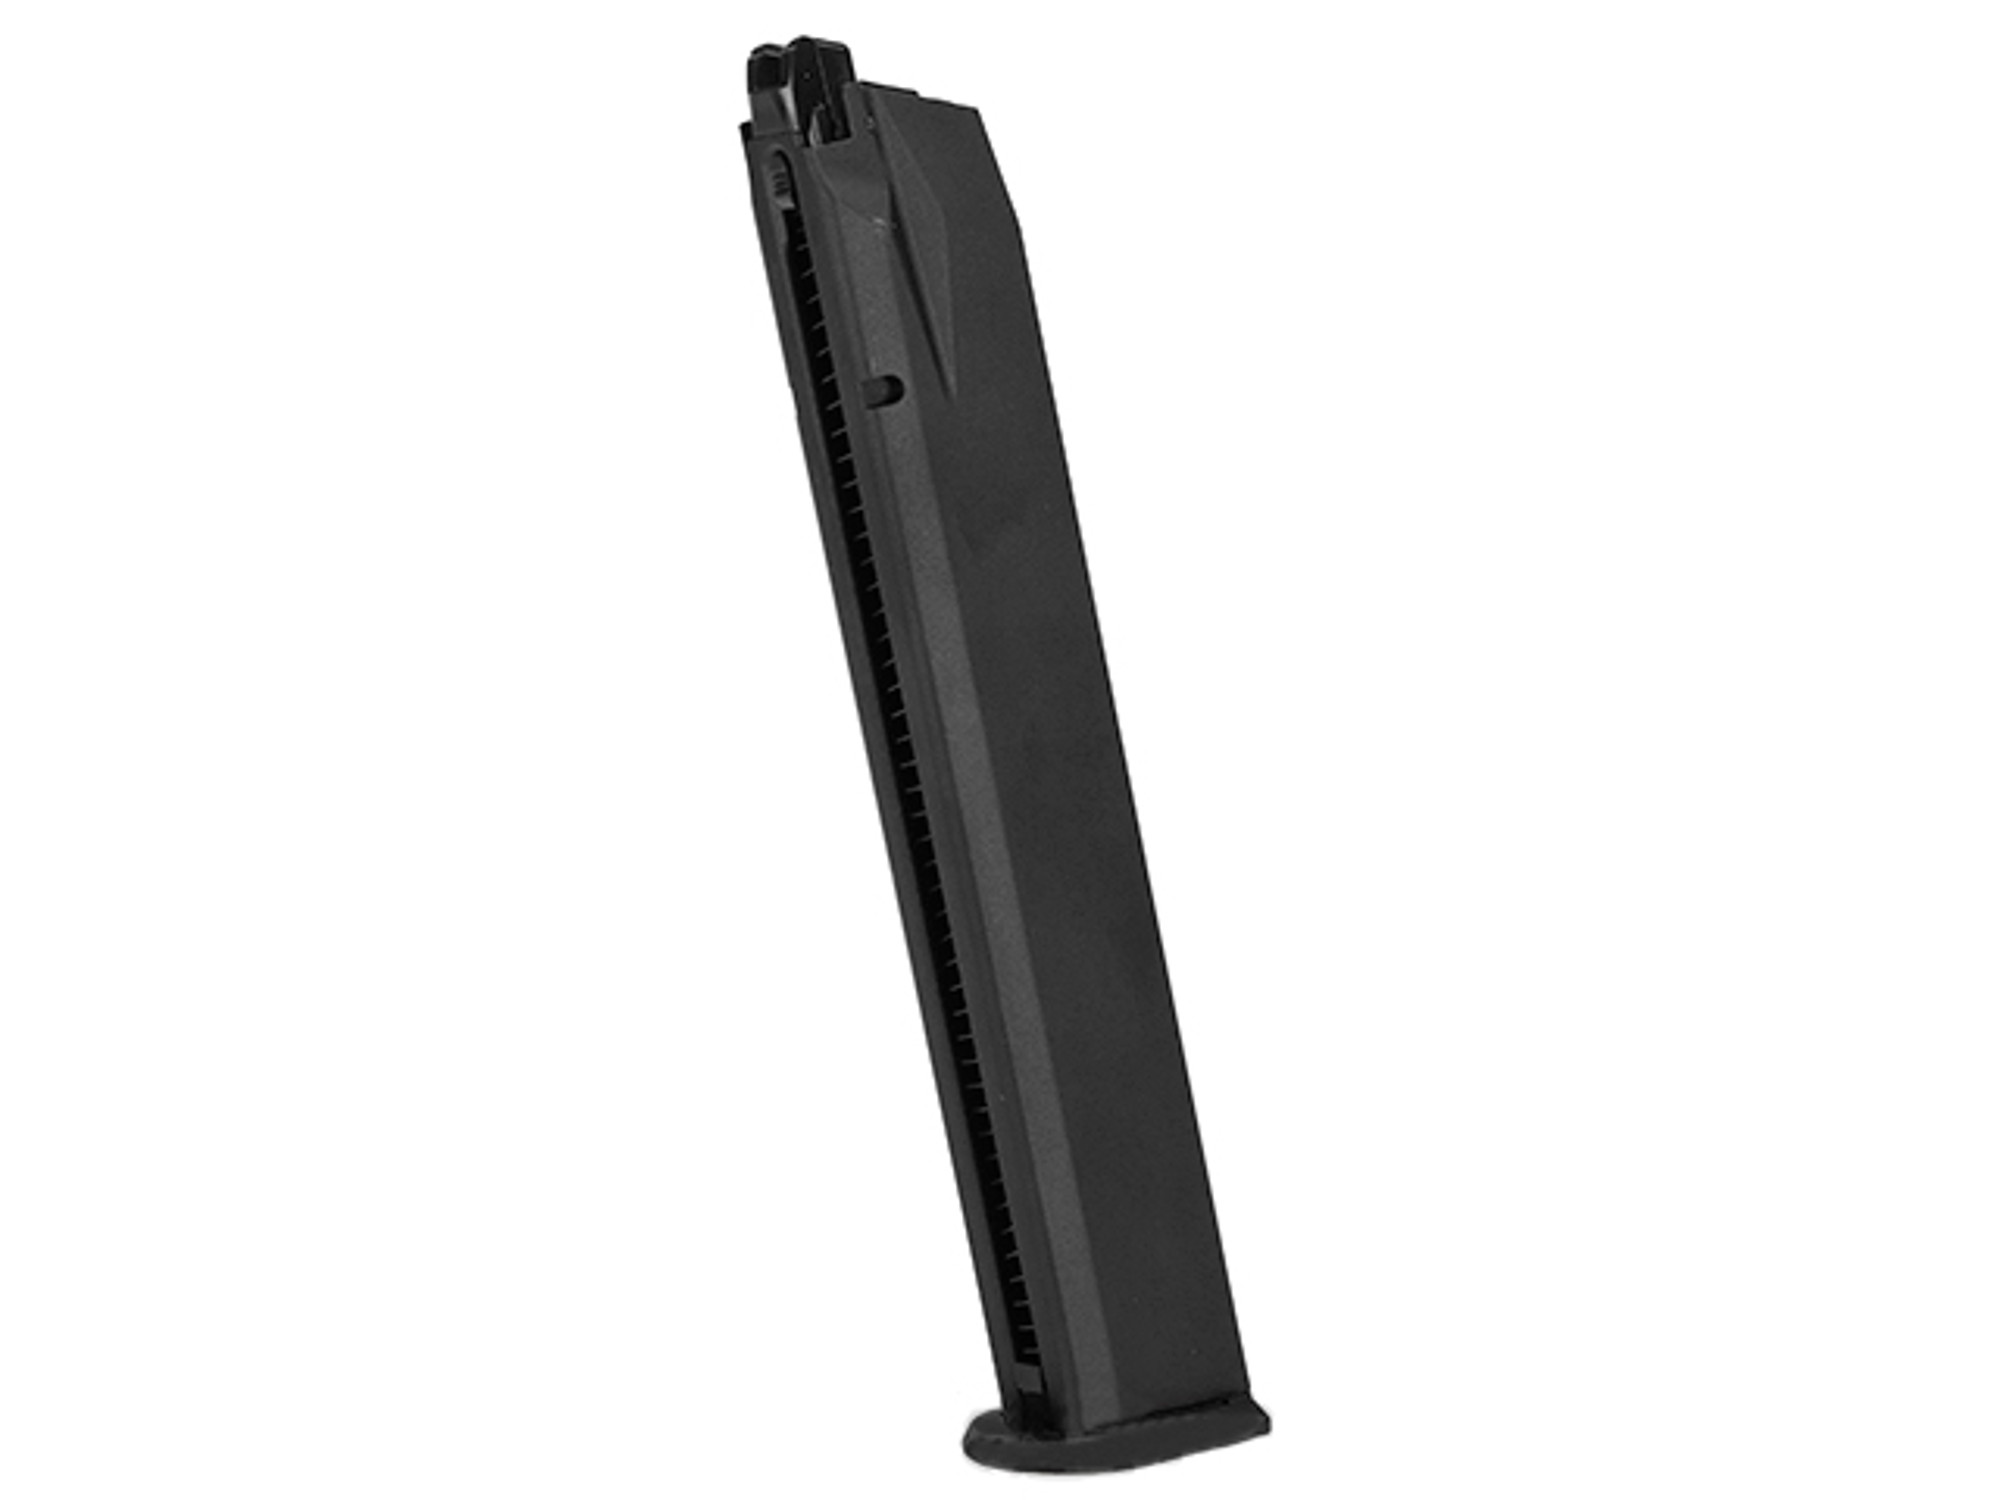 Umarex 45rd Extended High Capacity Magazine for Walther PPQ Airsoft GBB Pistols